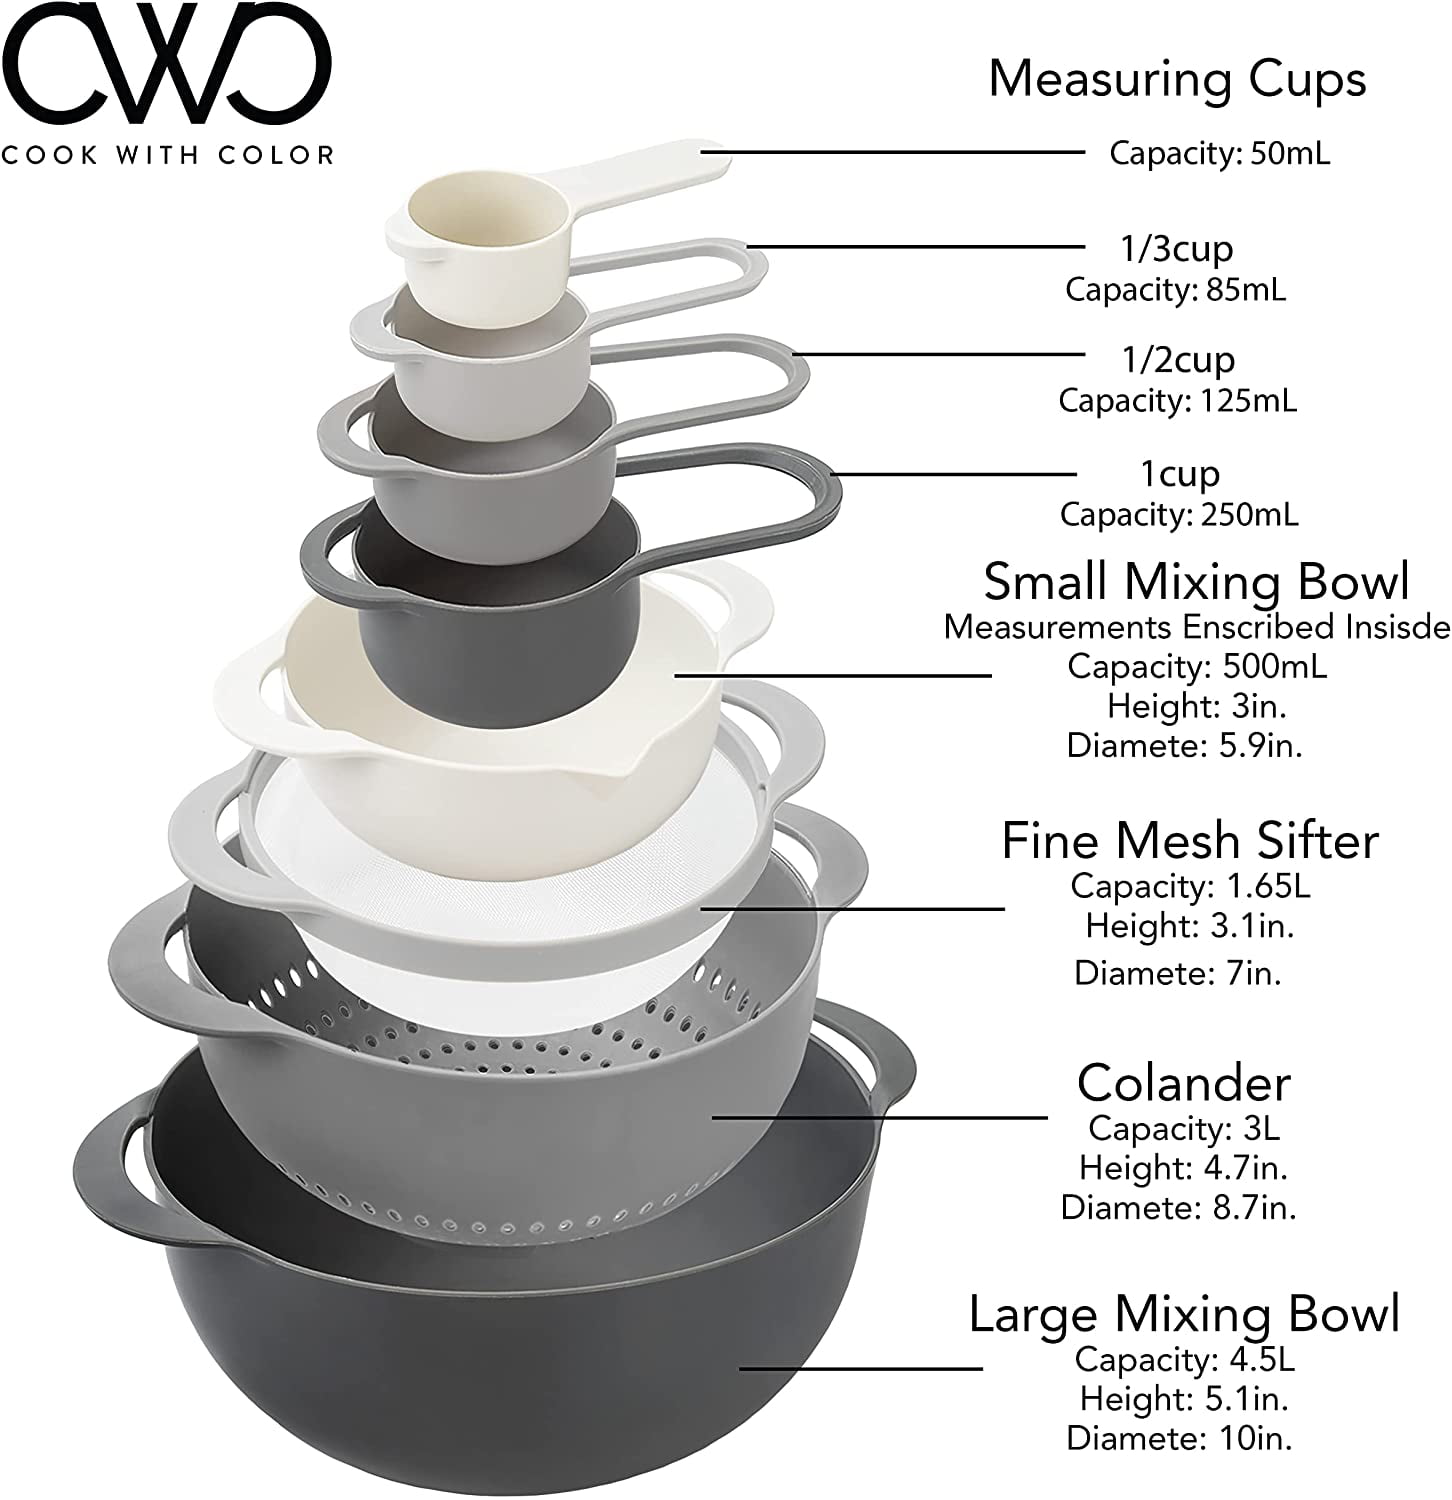 Lccowot 8PCS Mixing Bowls, Plastic Mixing Bowl Set, includes 2 Mixing Bowl,  1 Colander, 1 Sifter and 4 Measuring Cups, Space Saving Nesting Mixing